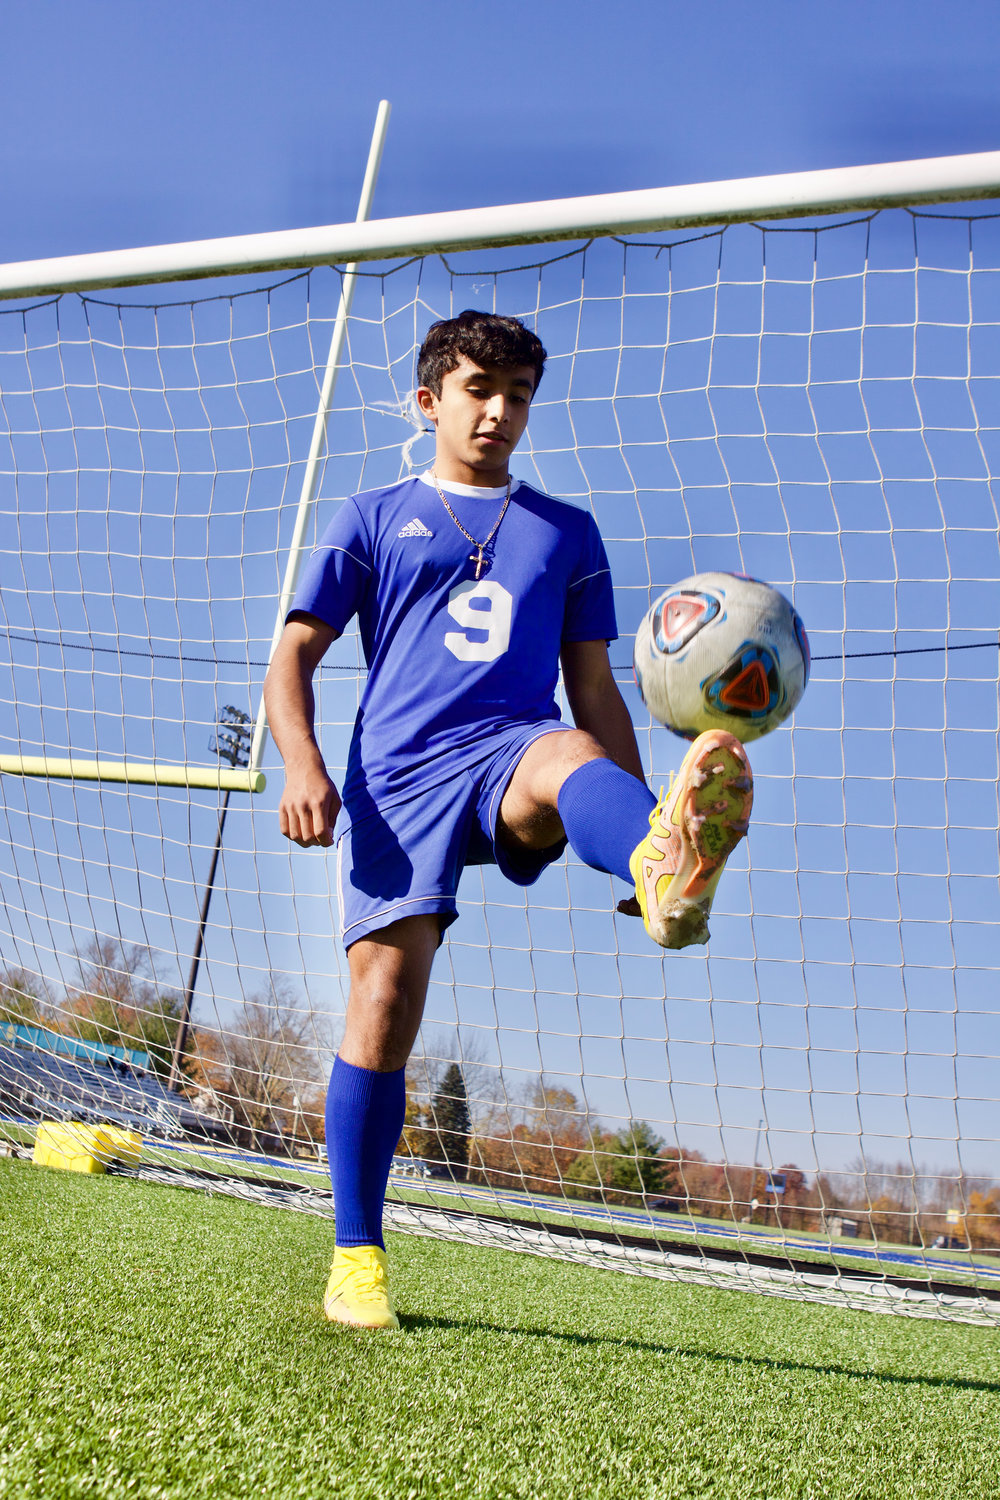 Junior Patrick Corado was 4th in the state in goals scored this season with 39 as he led Crawfordsville to their first sectional title since 2016.